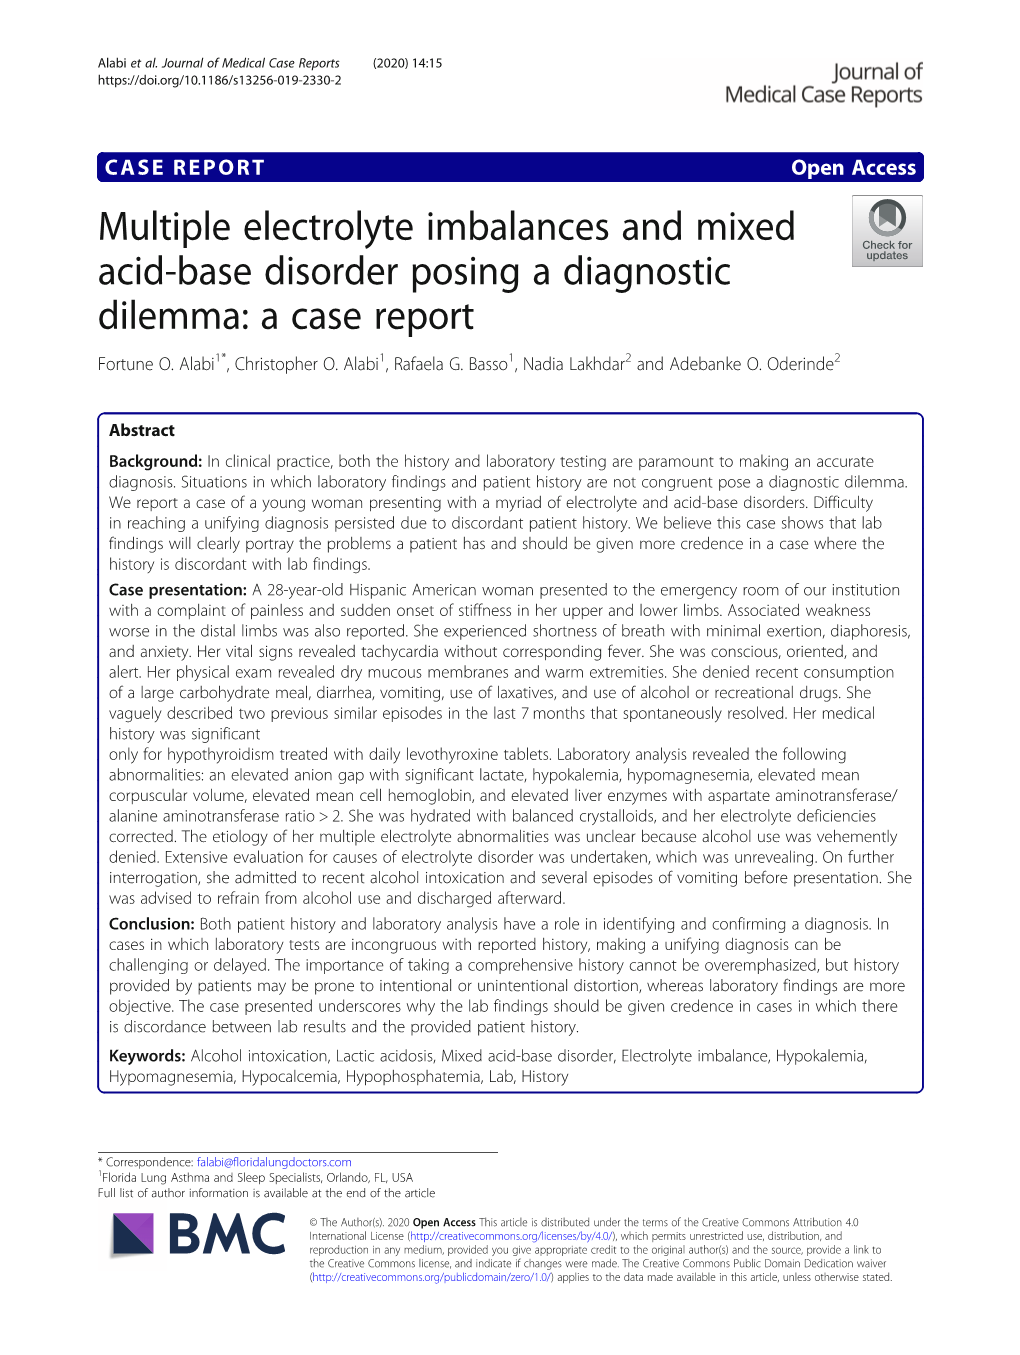 Multiple Electrolyte Imbalances and Mixed Acid-Base Disorder Posing a Diagnostic Dilemma: a Case Report Fortune O